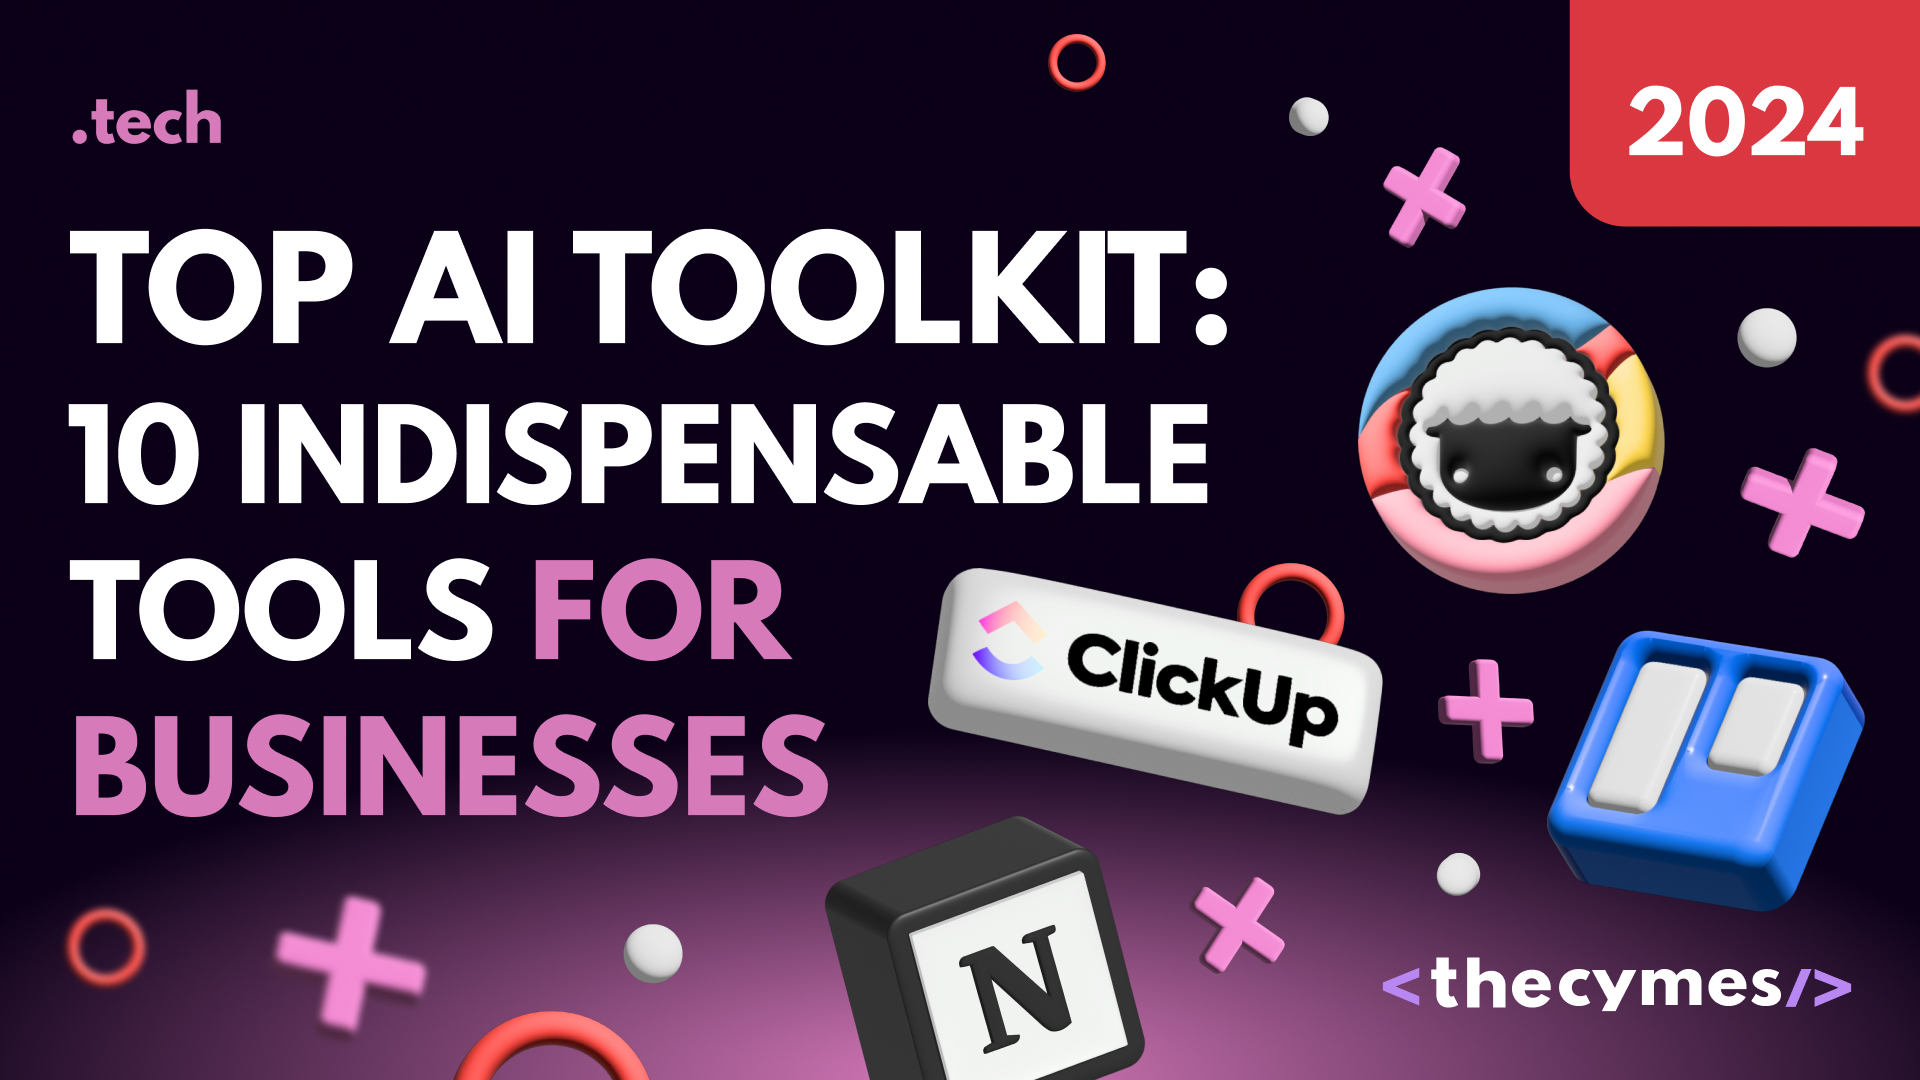 2024's Top AI Toolkit: 10 Indispensable Tools for Businesses cover